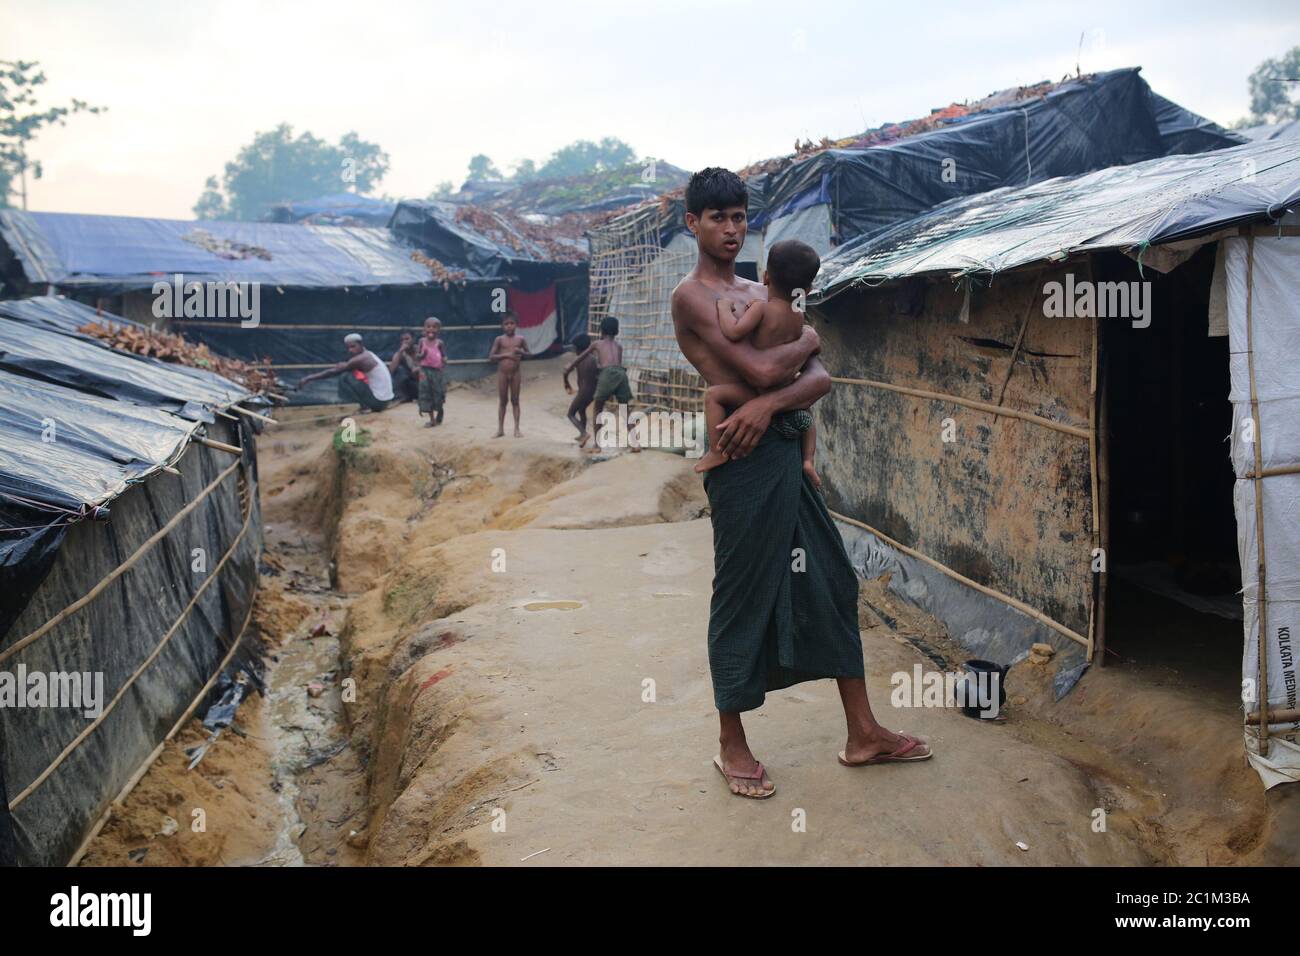 A Rohingya man stand with his son inside camp at Kutupalong refugee camp, Bangladesh, Tuesday, Oct. 03, 2017. Stock Photo